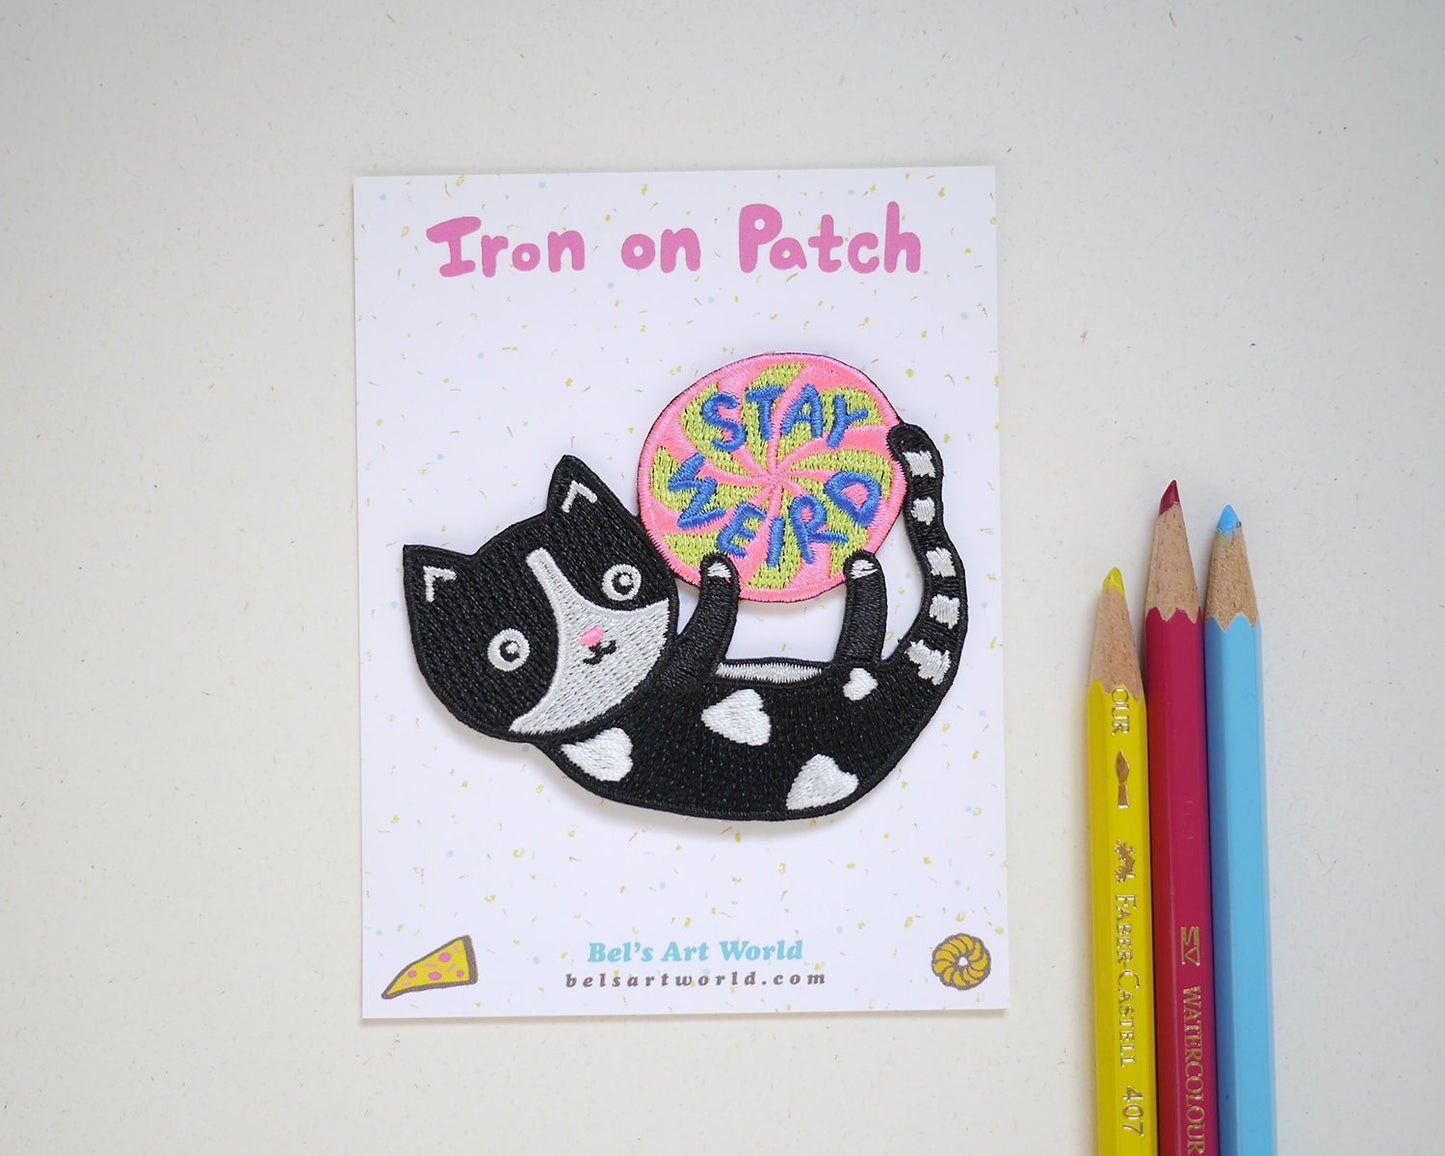 Stay weird kitty - Iron On Patch